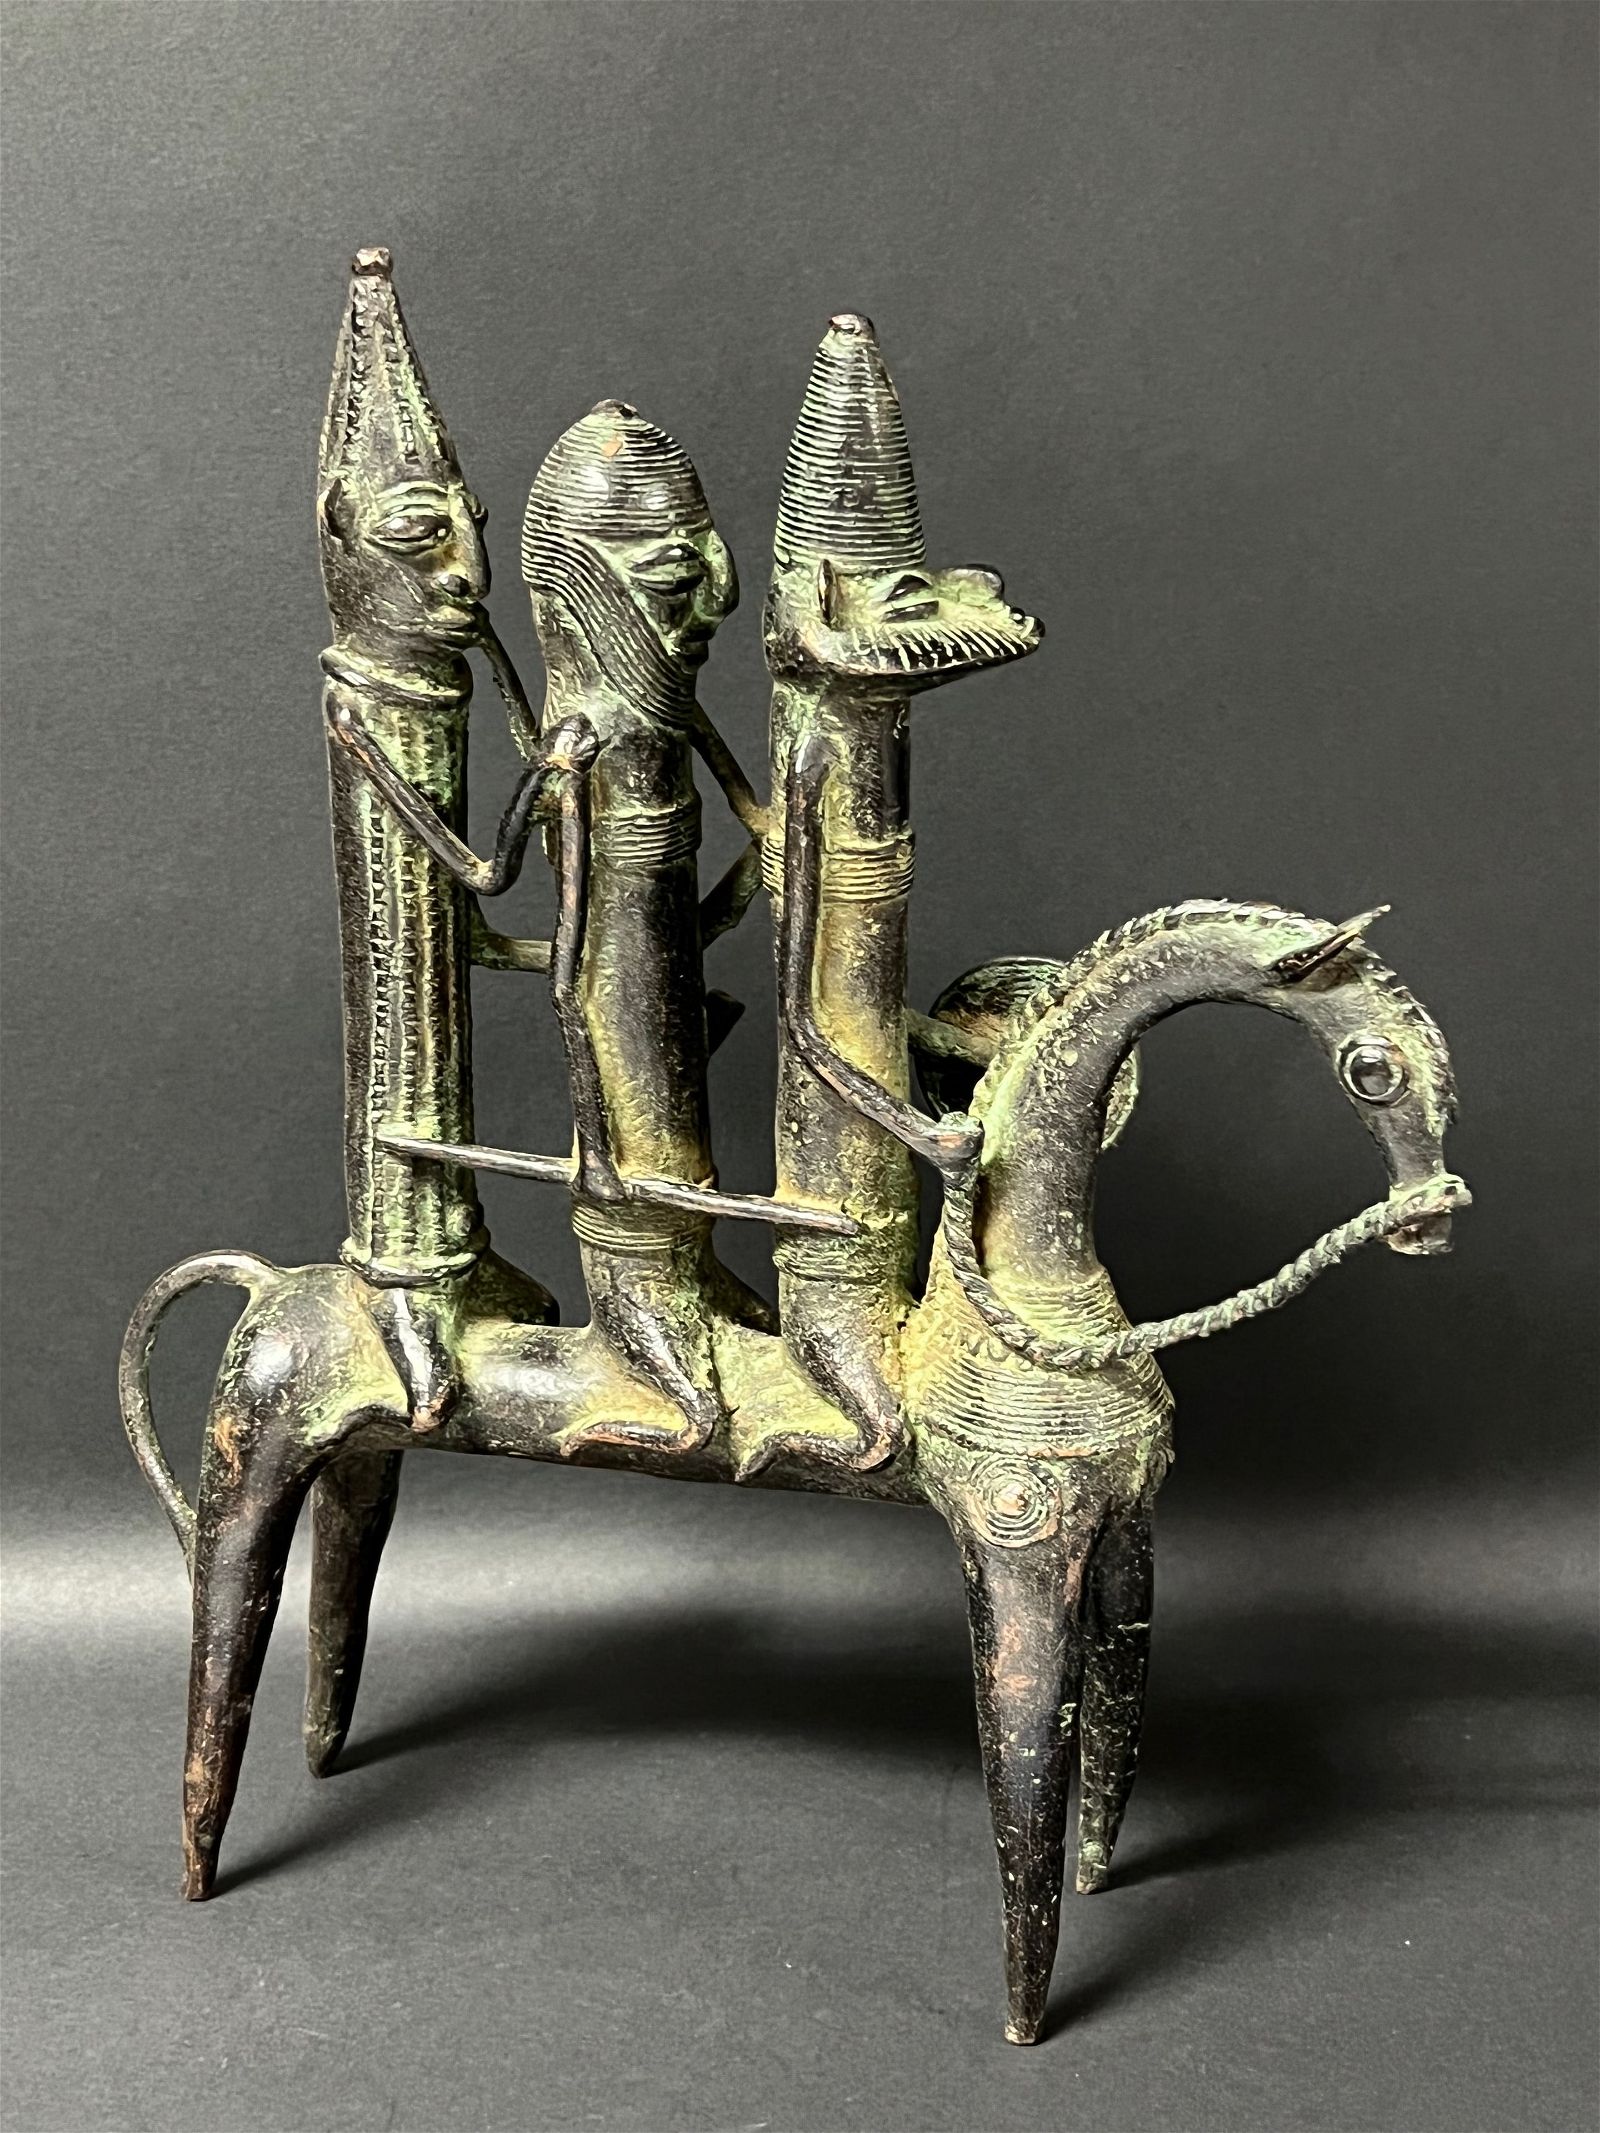 Late 20th-century bronze statue of Chad horse with riders, estimated at $1,500-$2,000 at Jasper52.